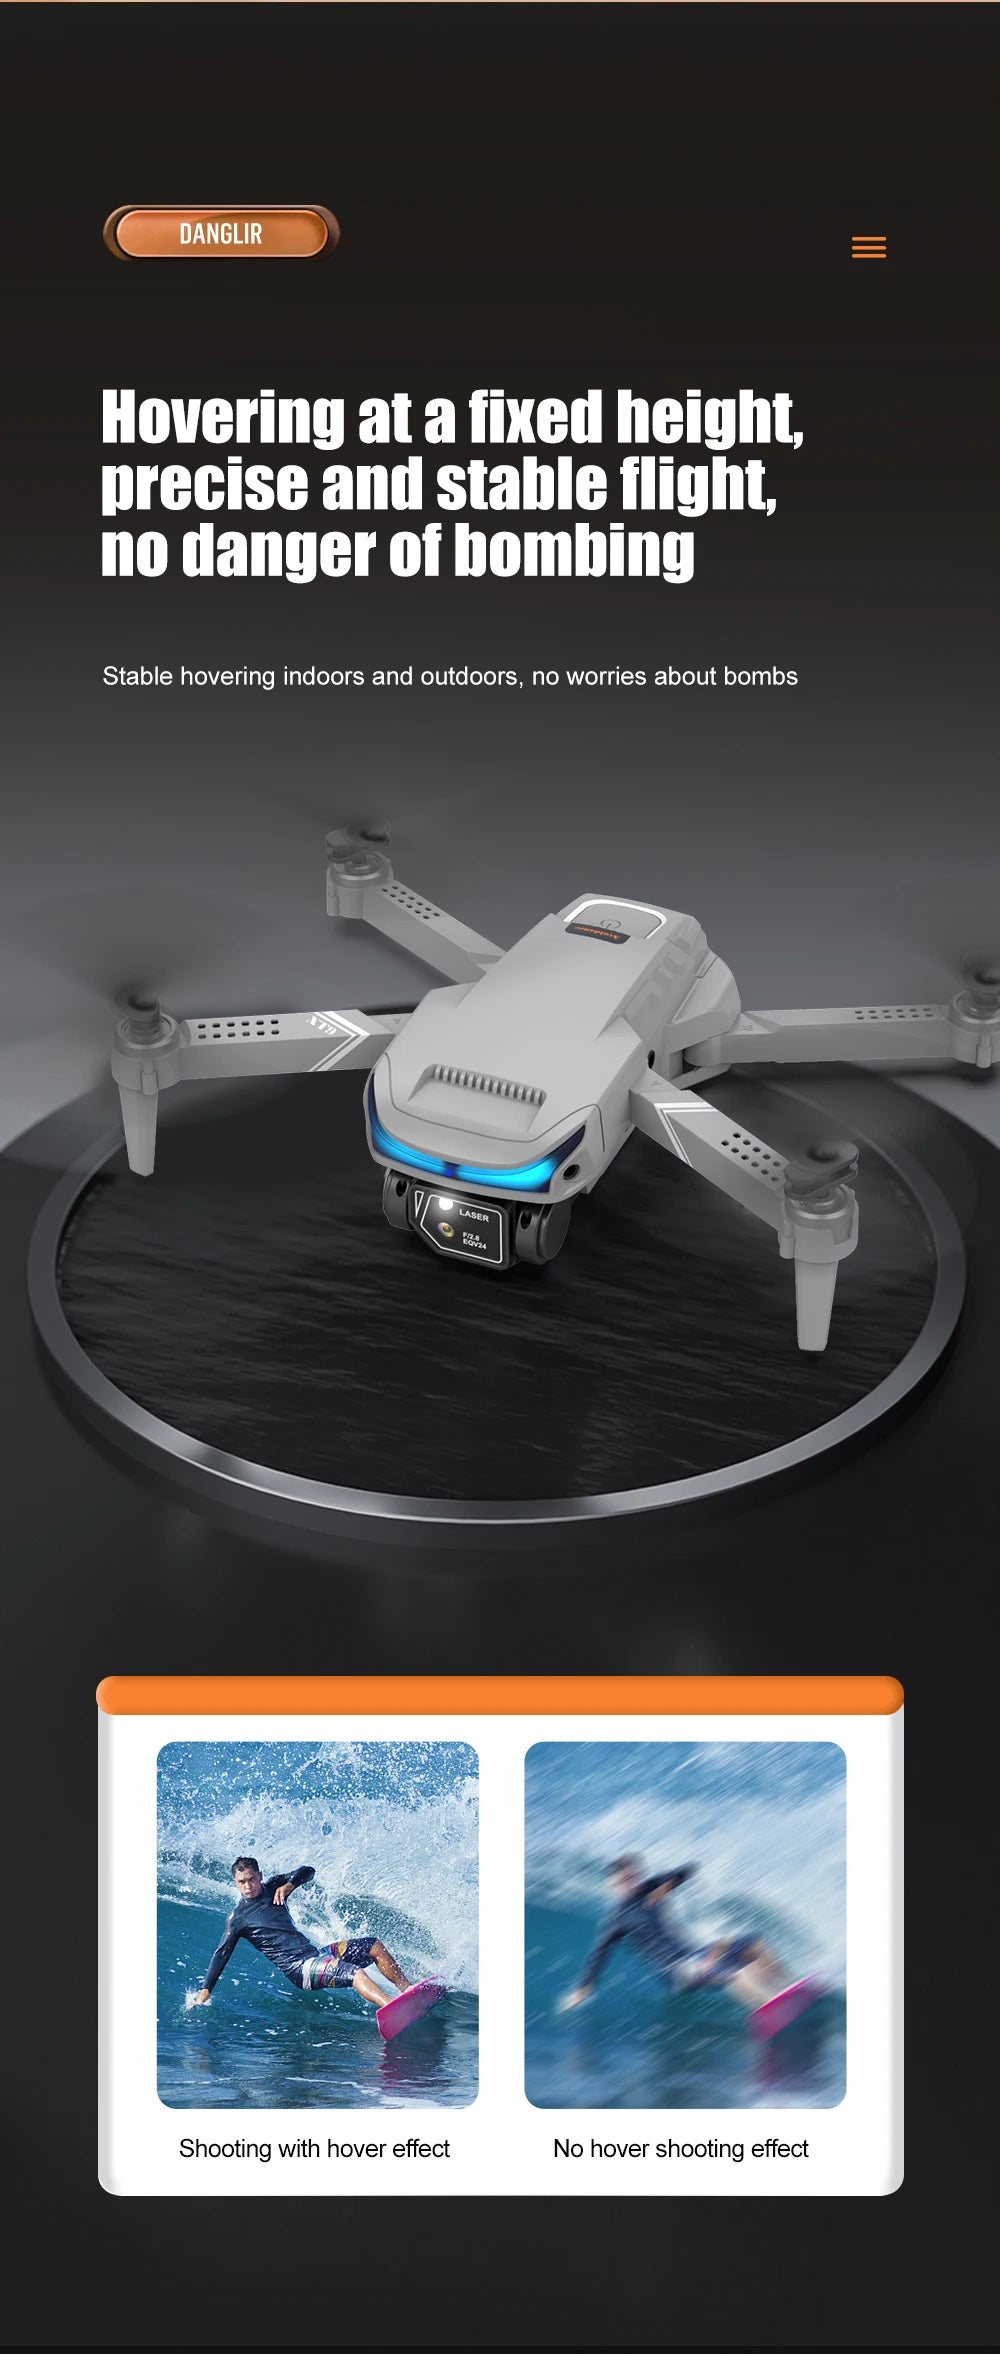 XT9 Mini Drone, danglir hovering at a fixed height precise and stable